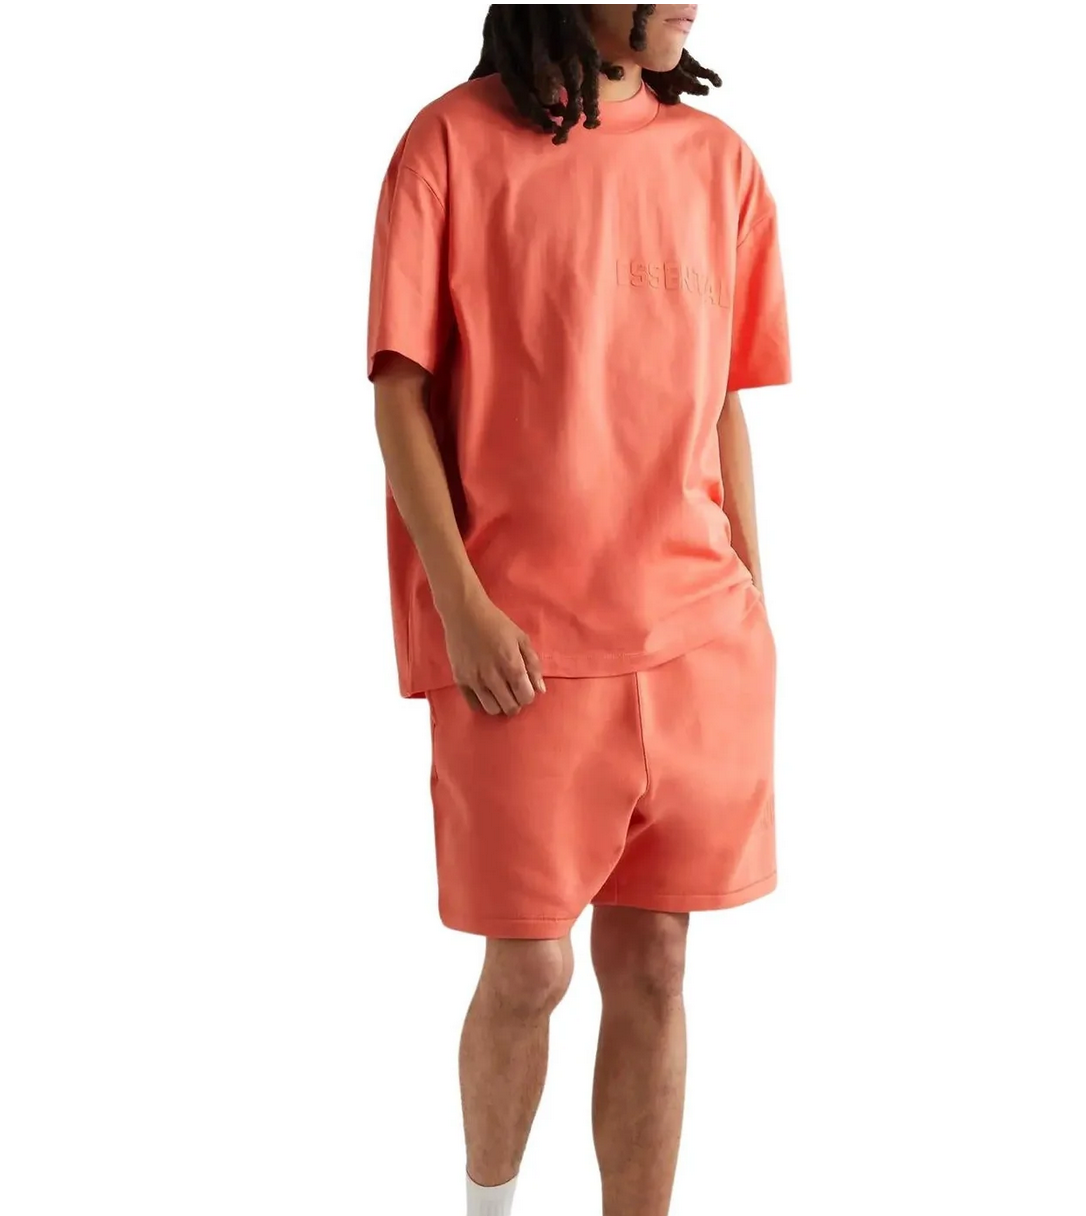 FEAR OF GOD Essentials Coral Hoodie